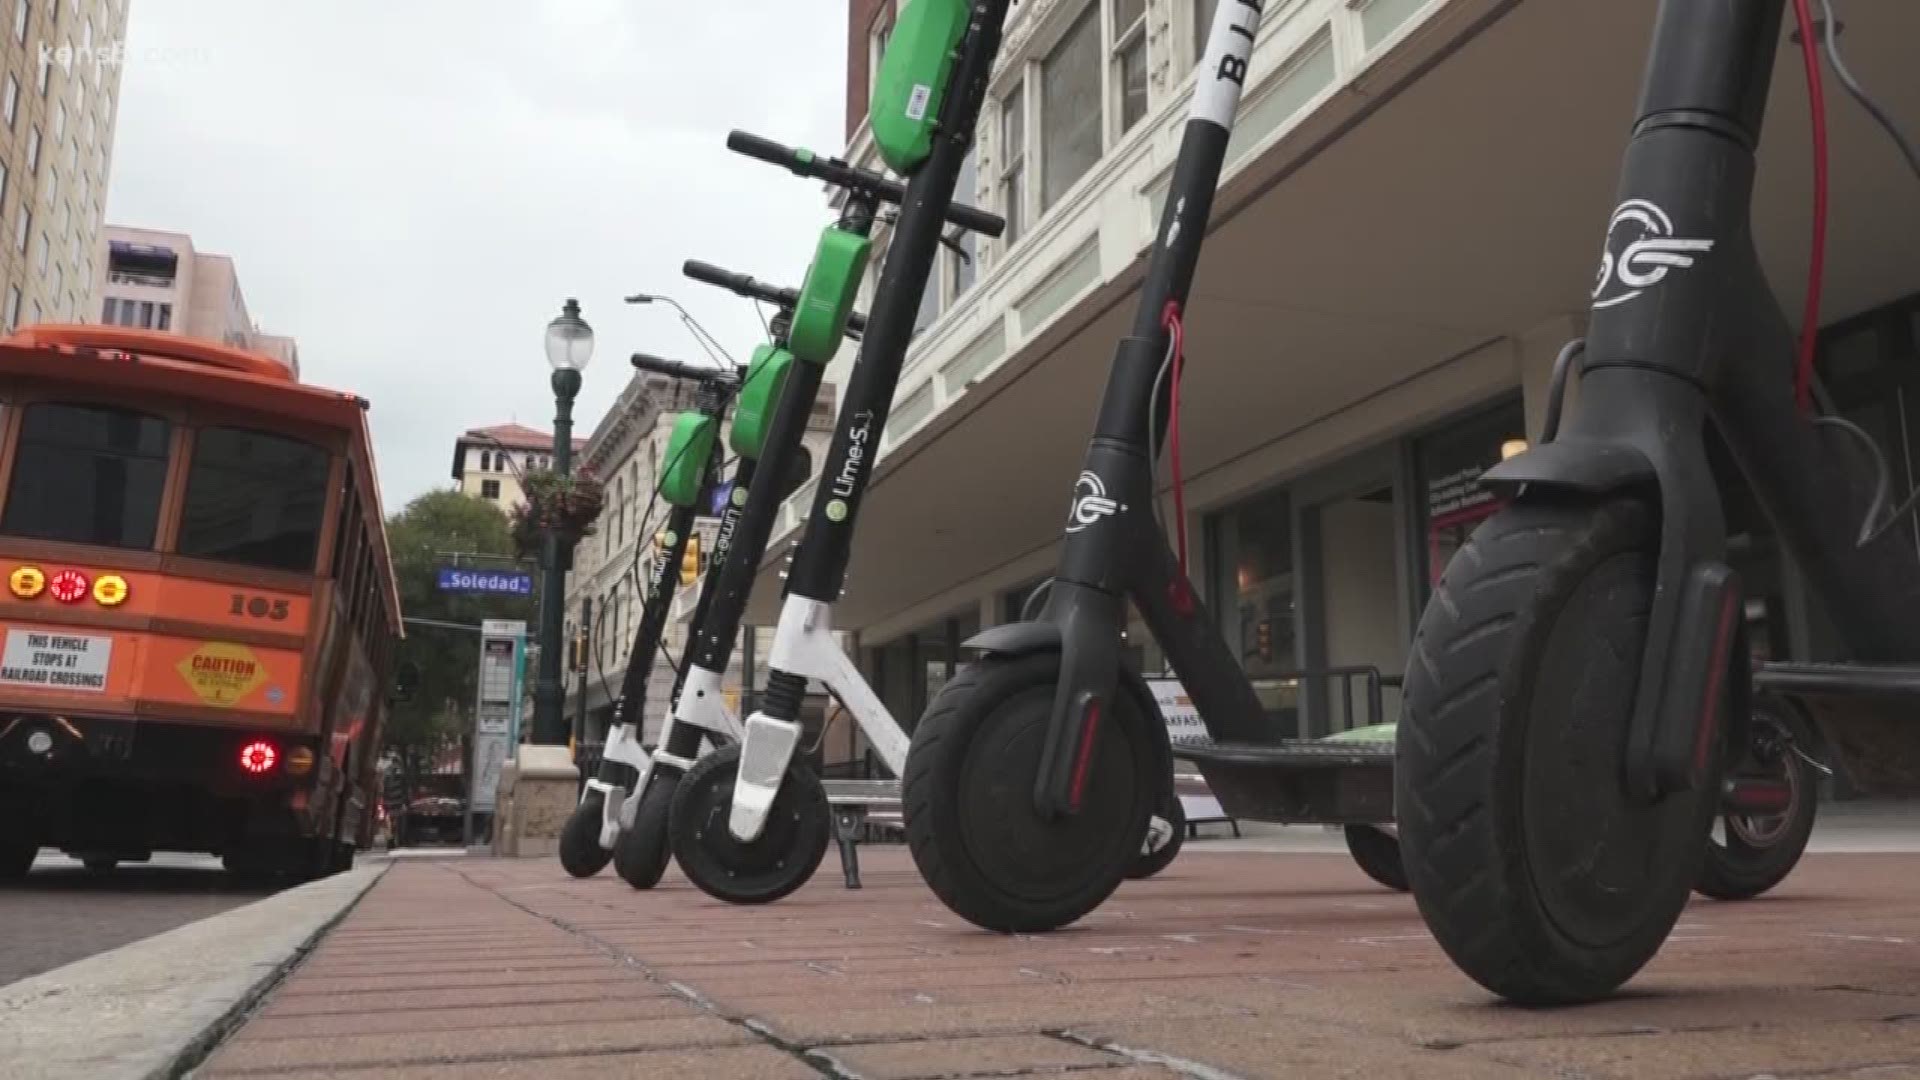 It's hard to avoid spotting a scooter downtown these days but the city has now taken action to regulate where they can go.